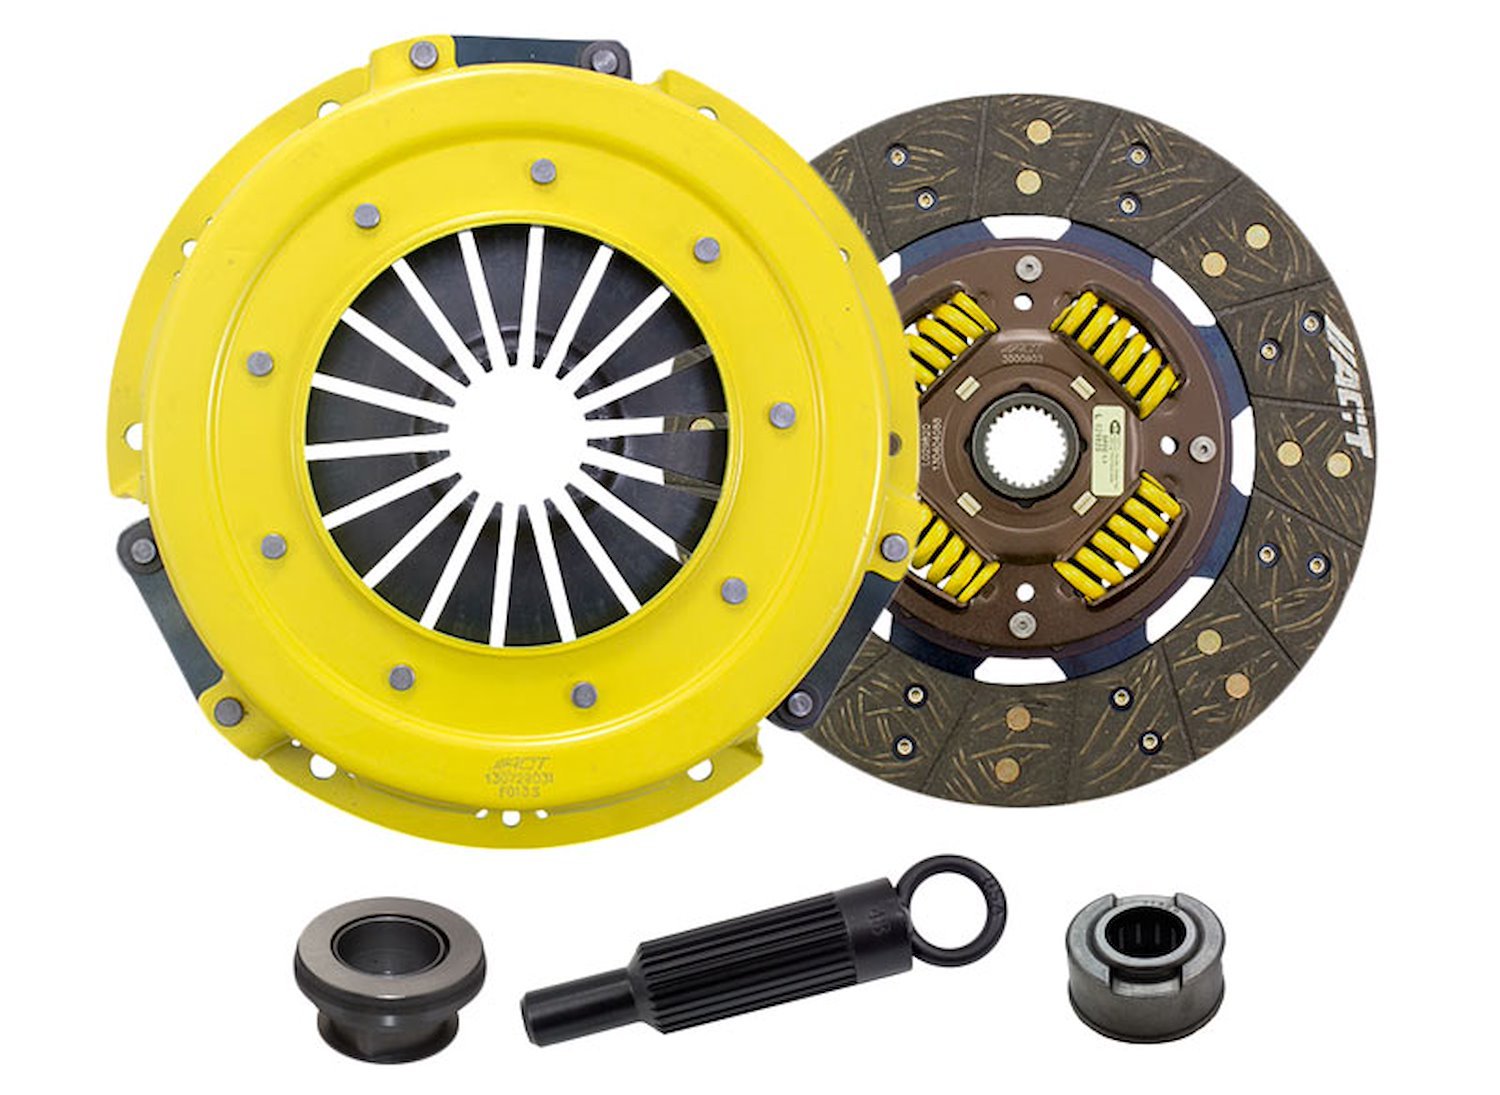 Sport/Performance Street Sprung Transmission Clutch Kit Fits Select Ford/Lincoln/Mercury/Mazda